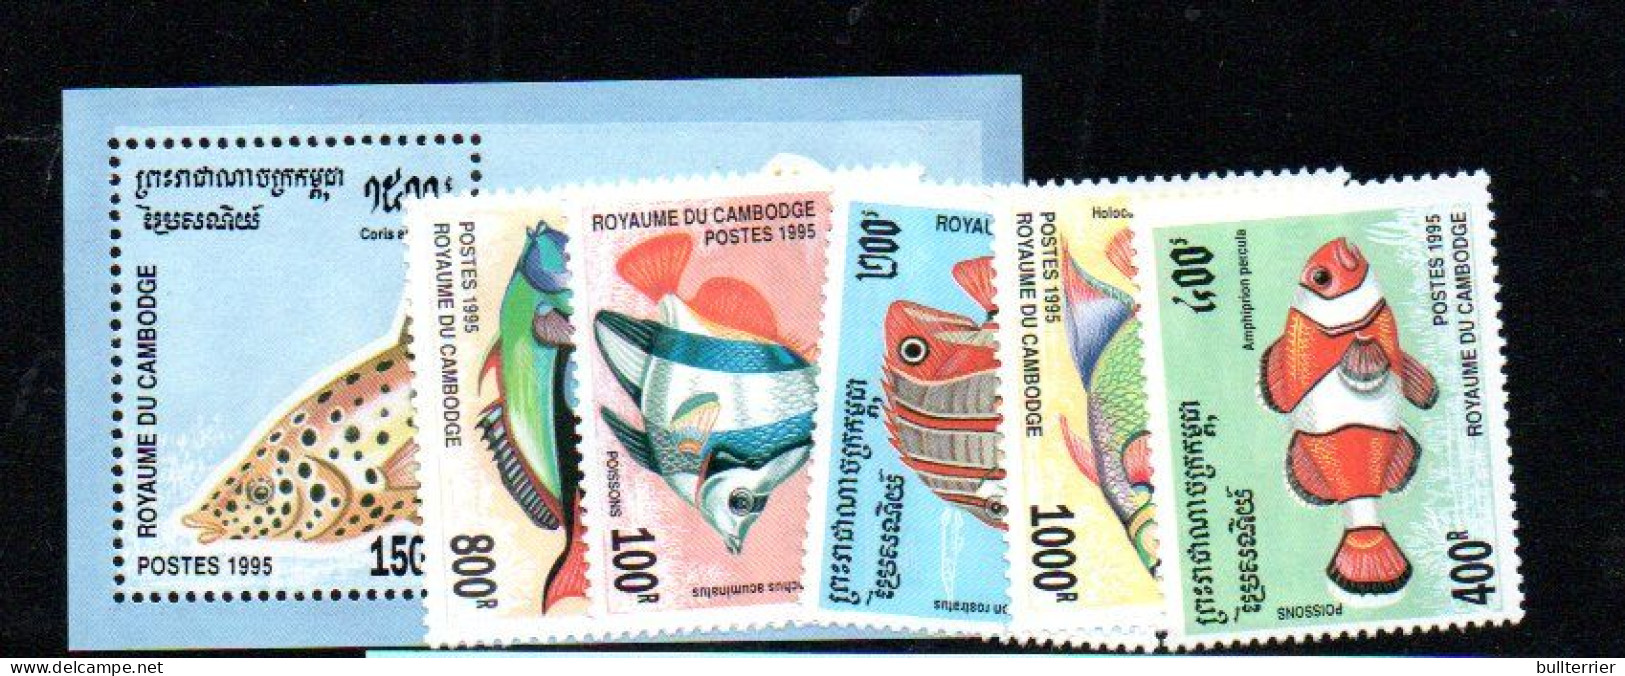 CAMBODIA - 1985 - FISHES SET OF 5 + SOUVENIR SHEET  MINT NEVER HINGED  SG CAT £16 - Cambodia